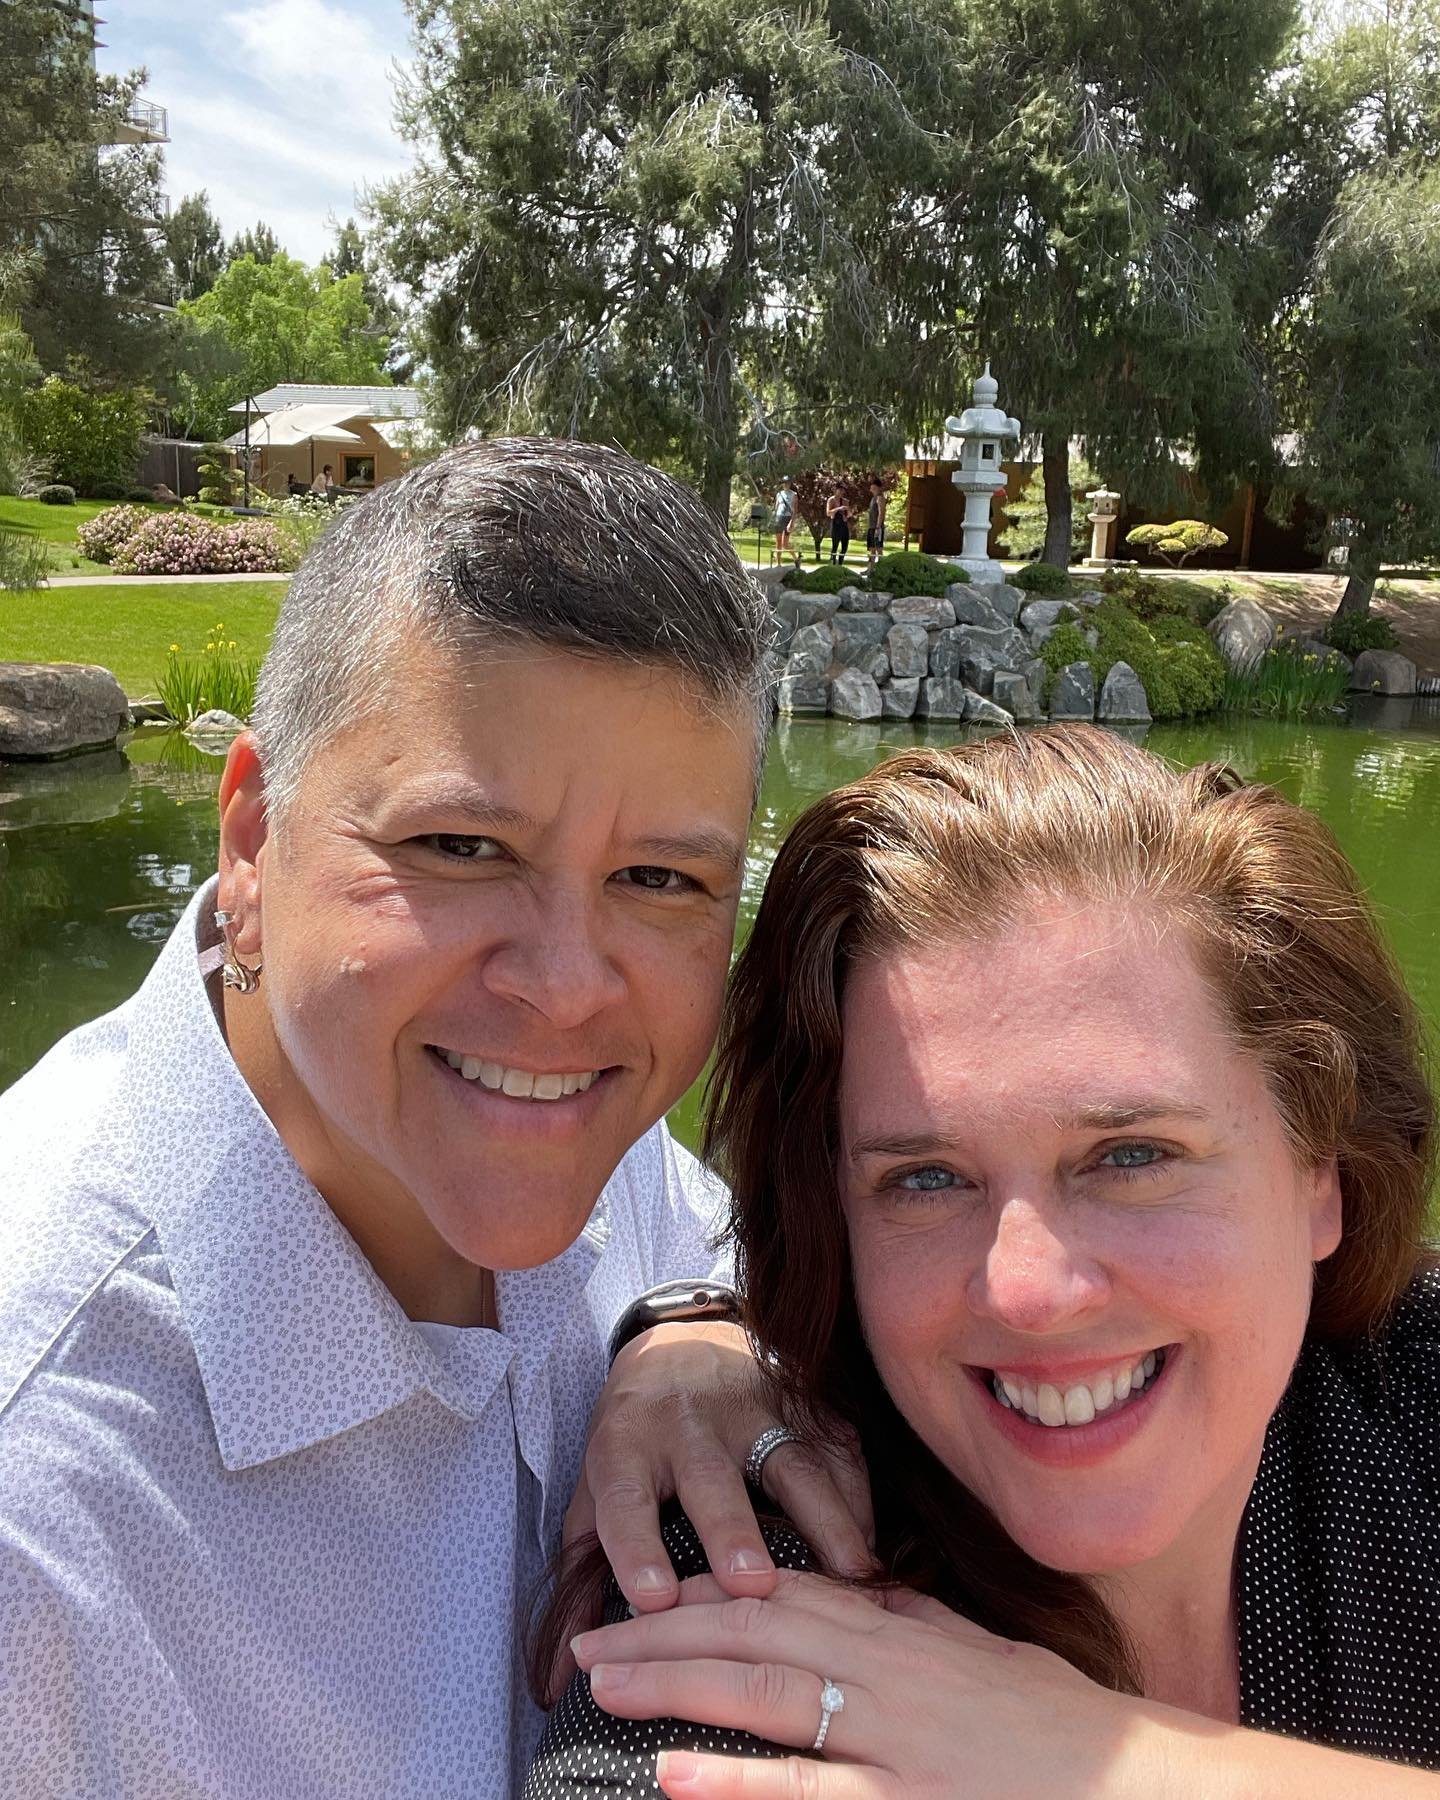 The countdown is on: just over 3 weeks until wedding weekend for Jenn and Maria! Can&rsquo;t wait to watch this couple say &ldquo;I do&rdquo;!
.
#our4everjam #azwedding #fallwedding #happycouple #azweddingplanner #theweddingtherapist